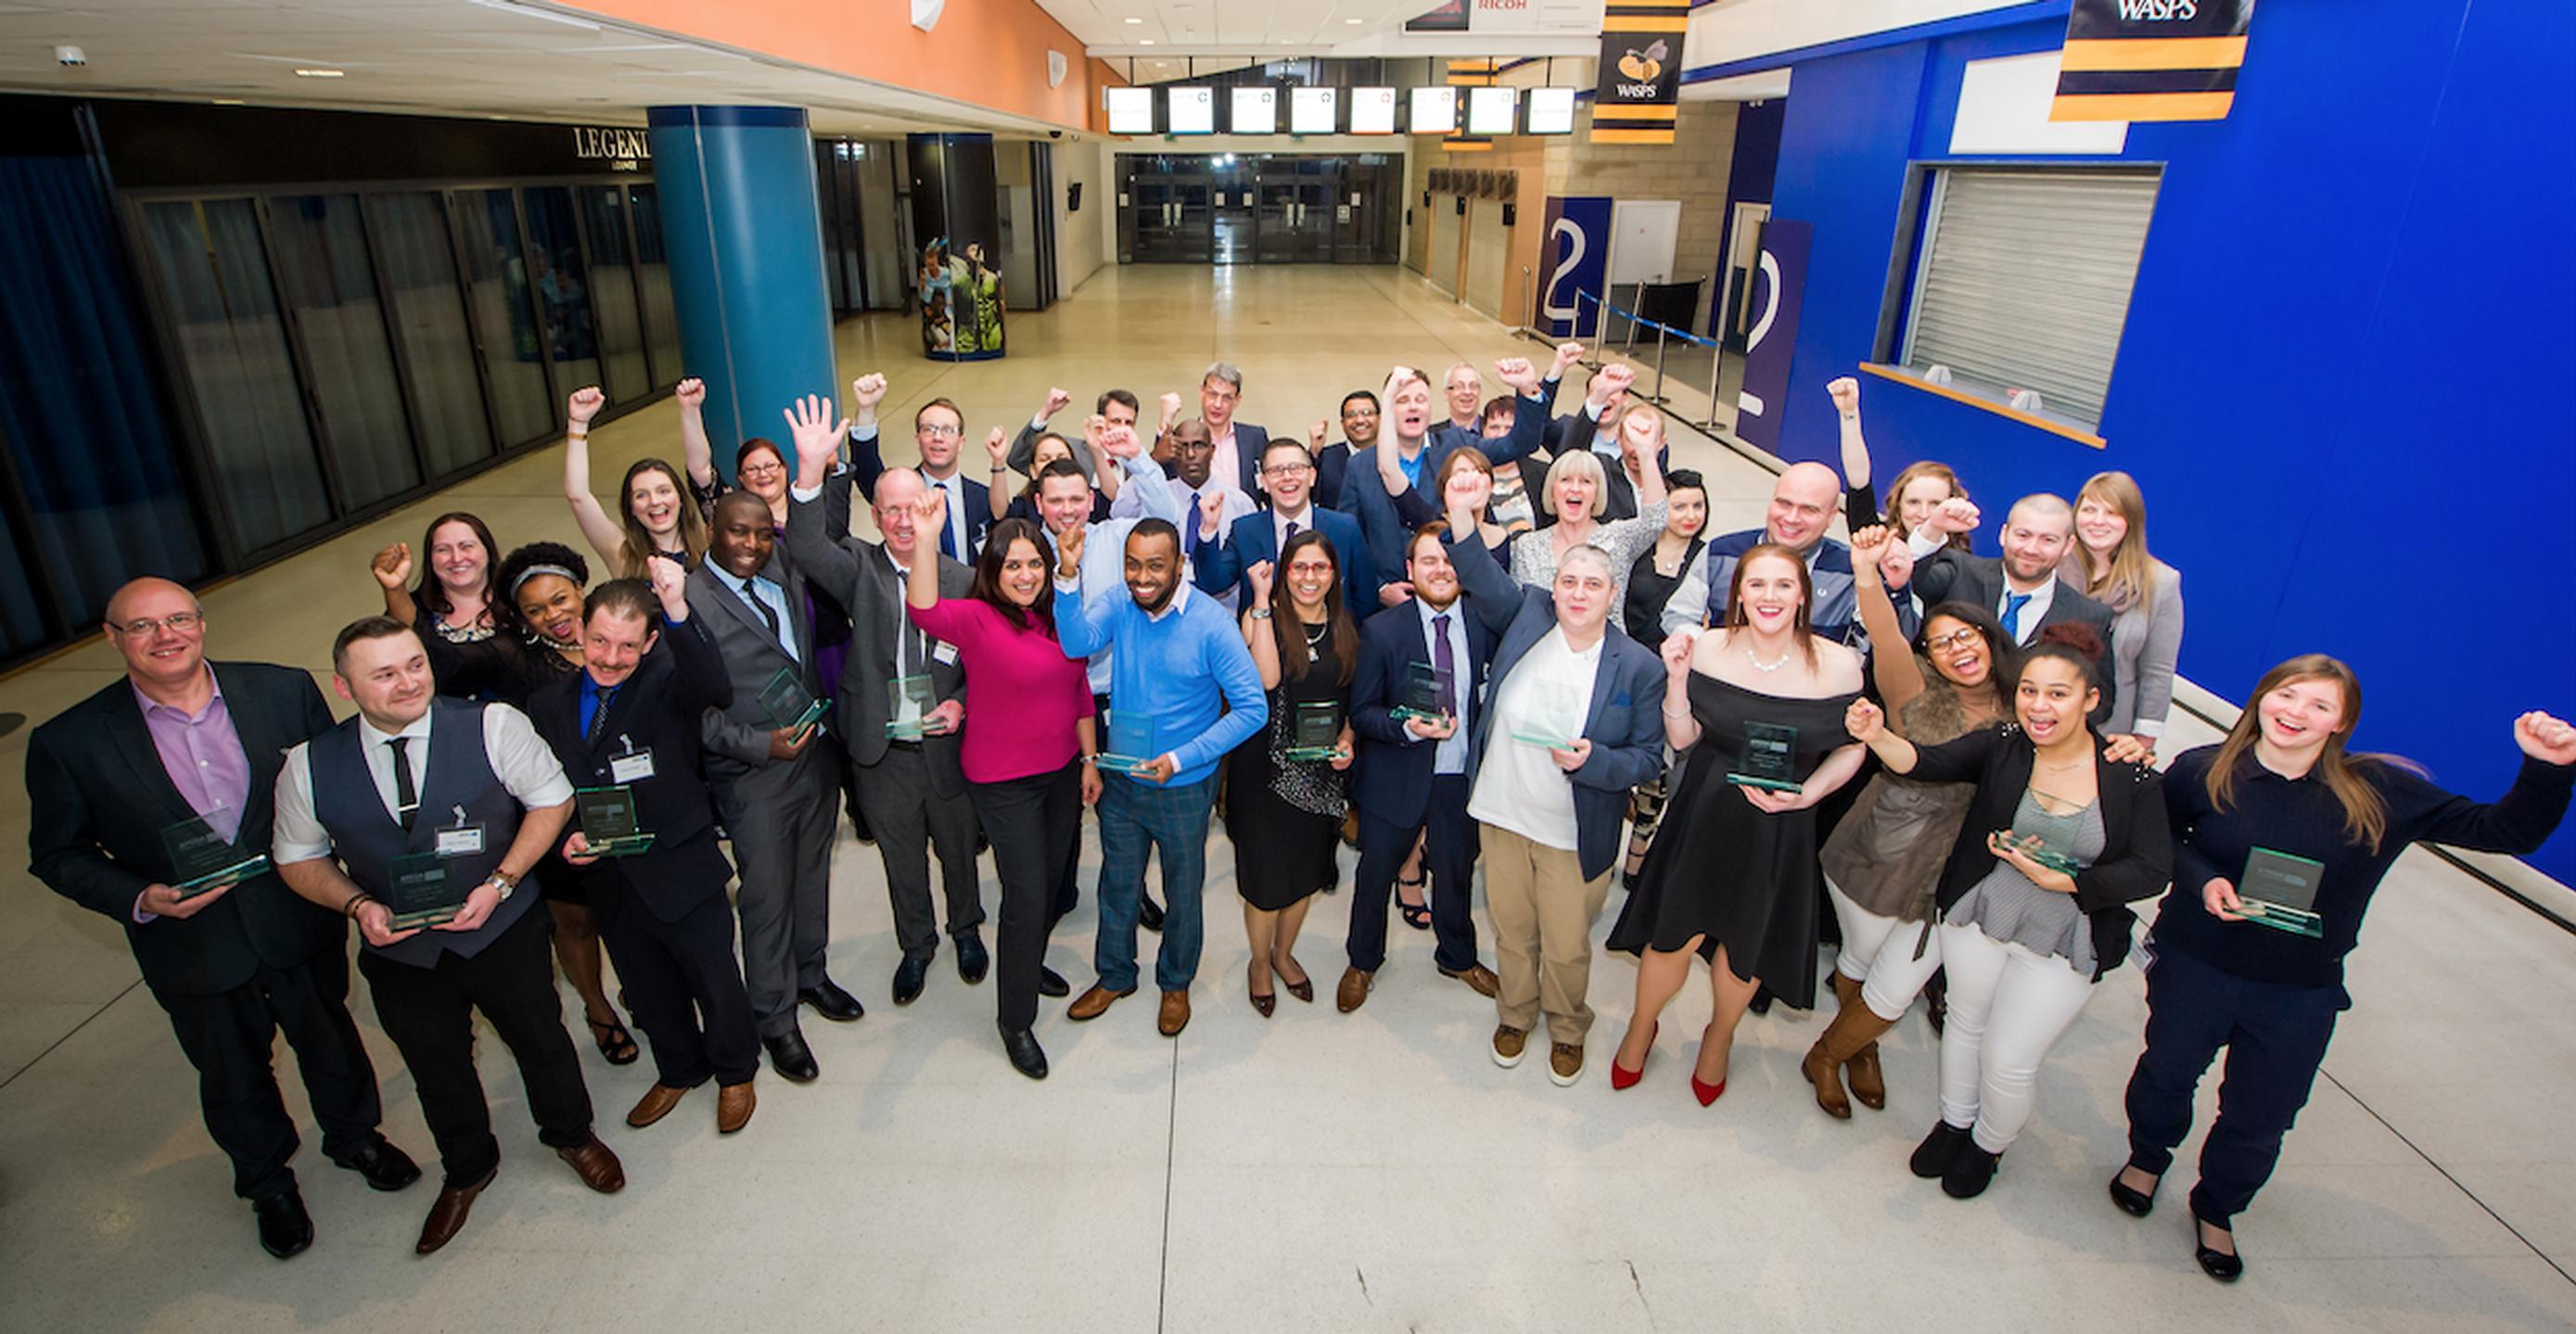 The APCOA Staff Recognition Award recipients with friends and colleagues at the Ricoh Arena